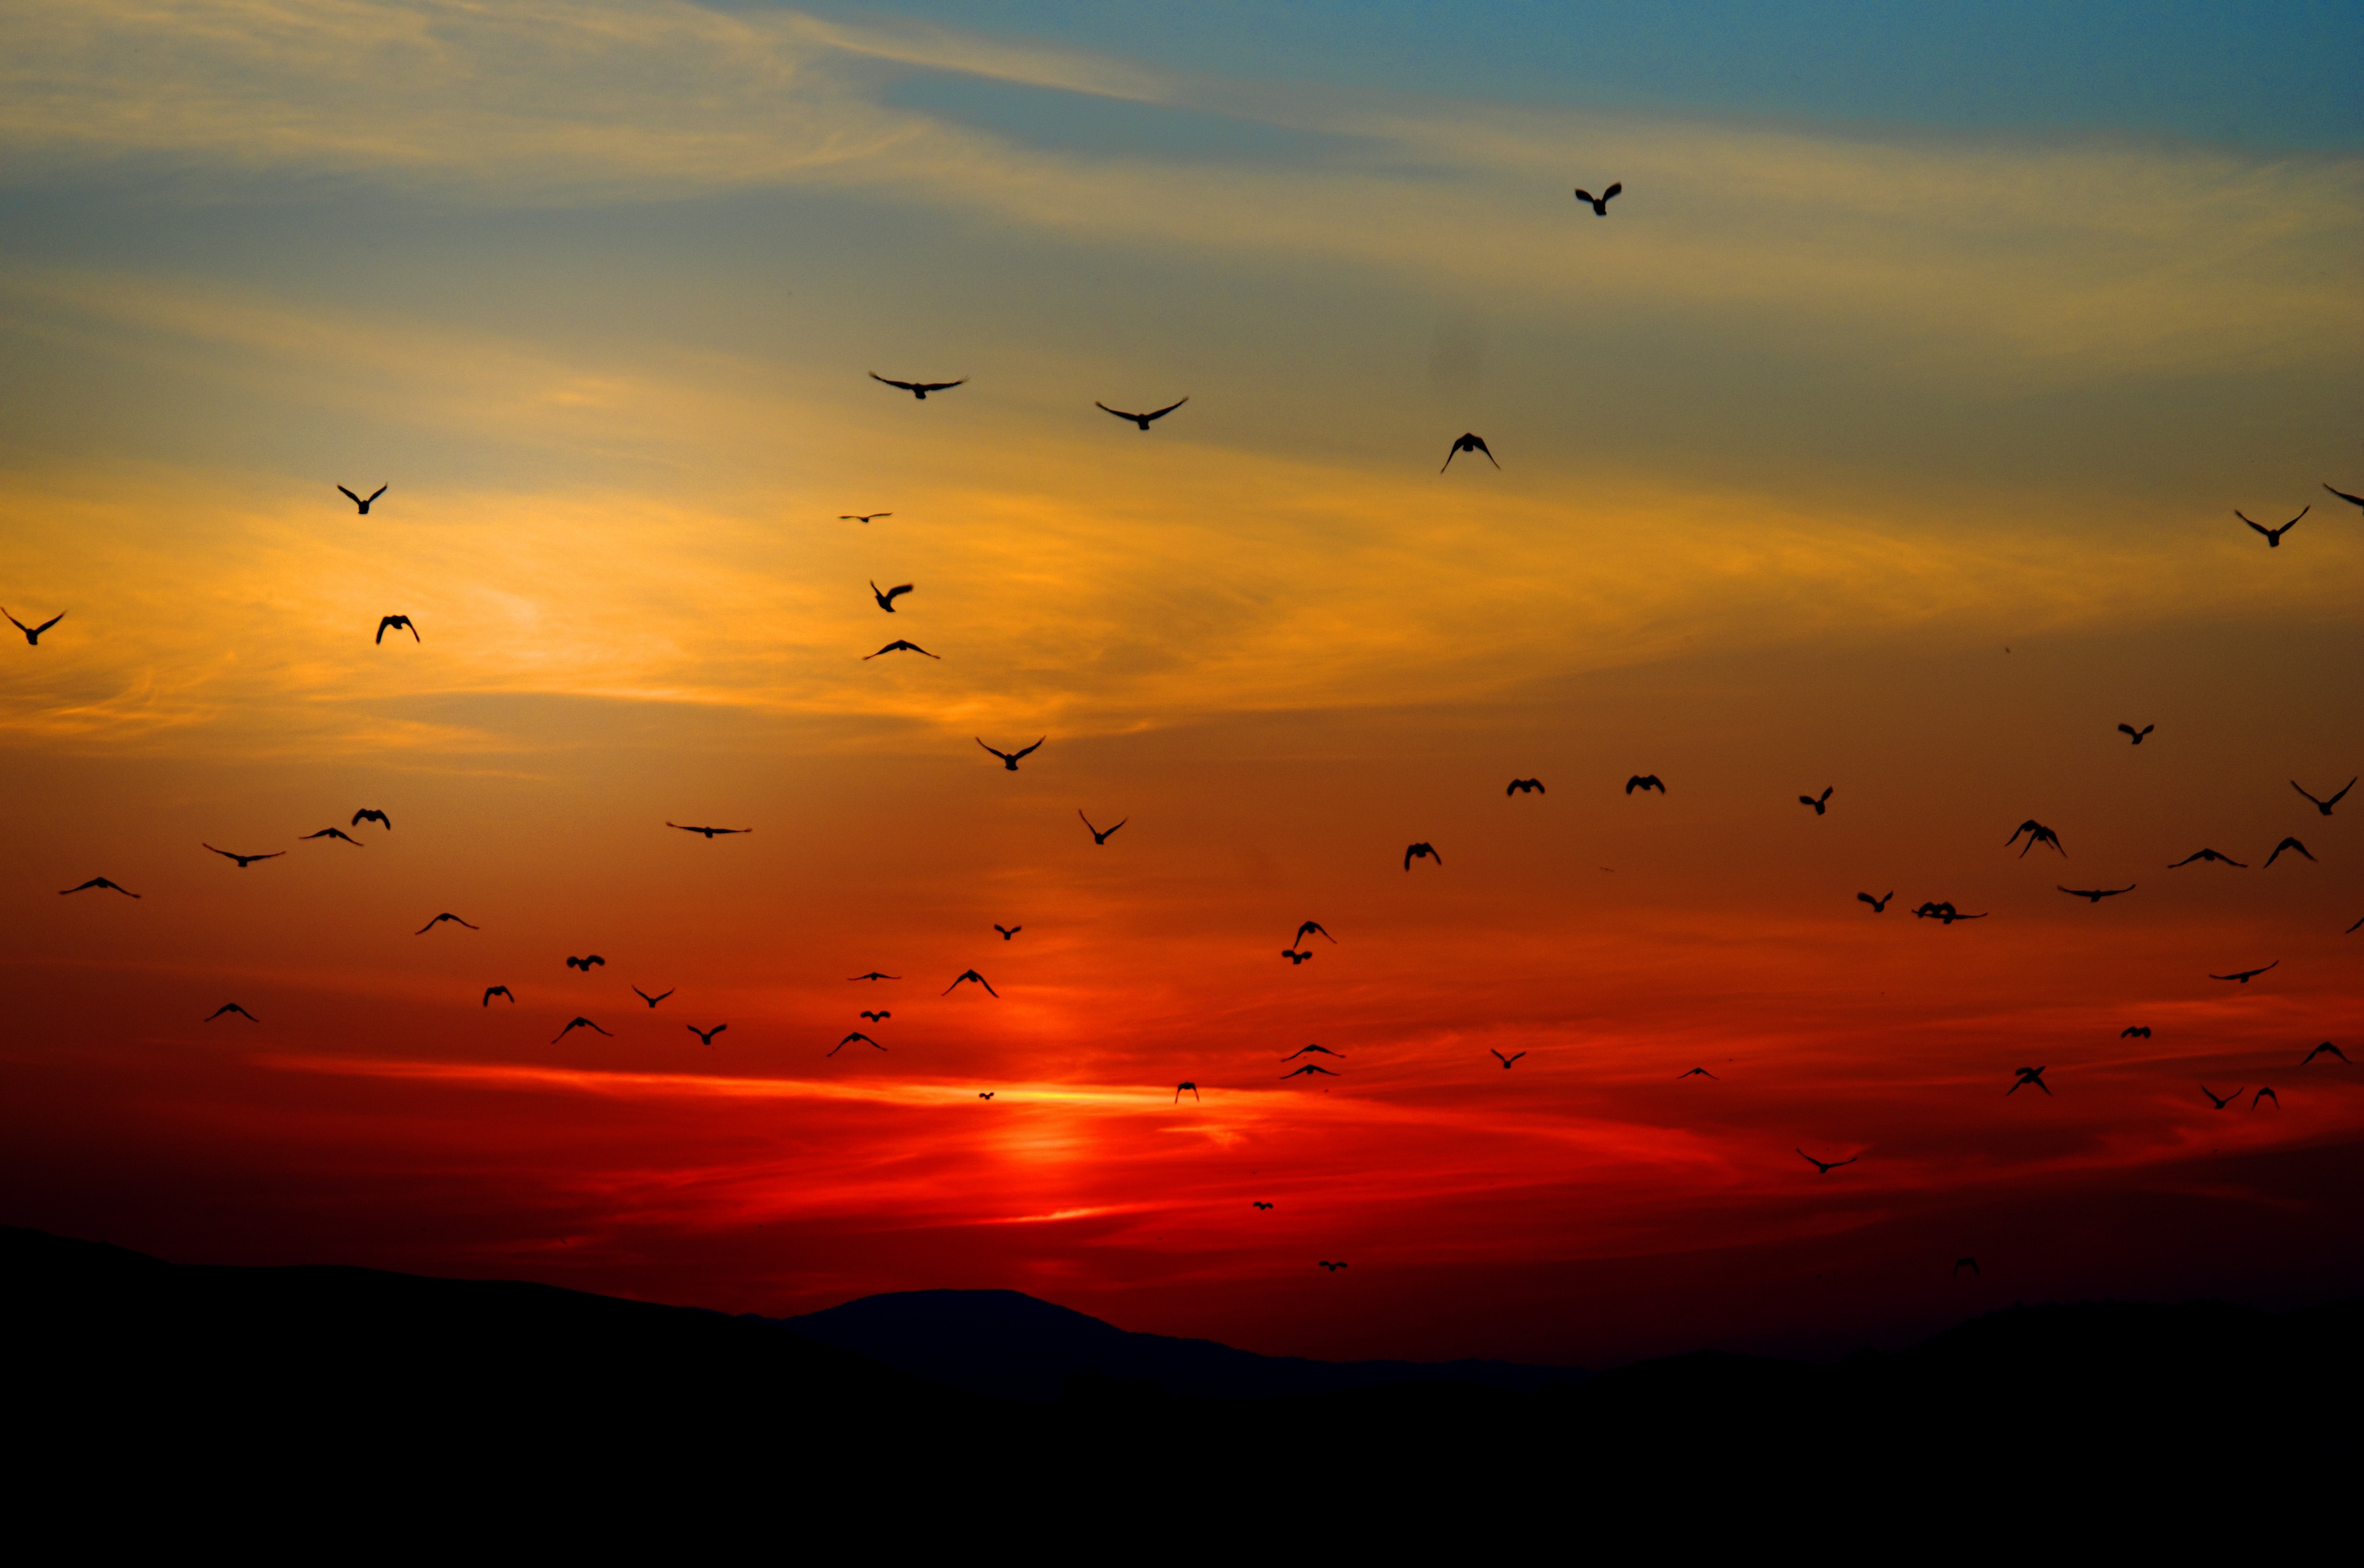 flock-of-birds-flying-above-the-mountain-during-sunset-70577.jpg - 1,53 MB